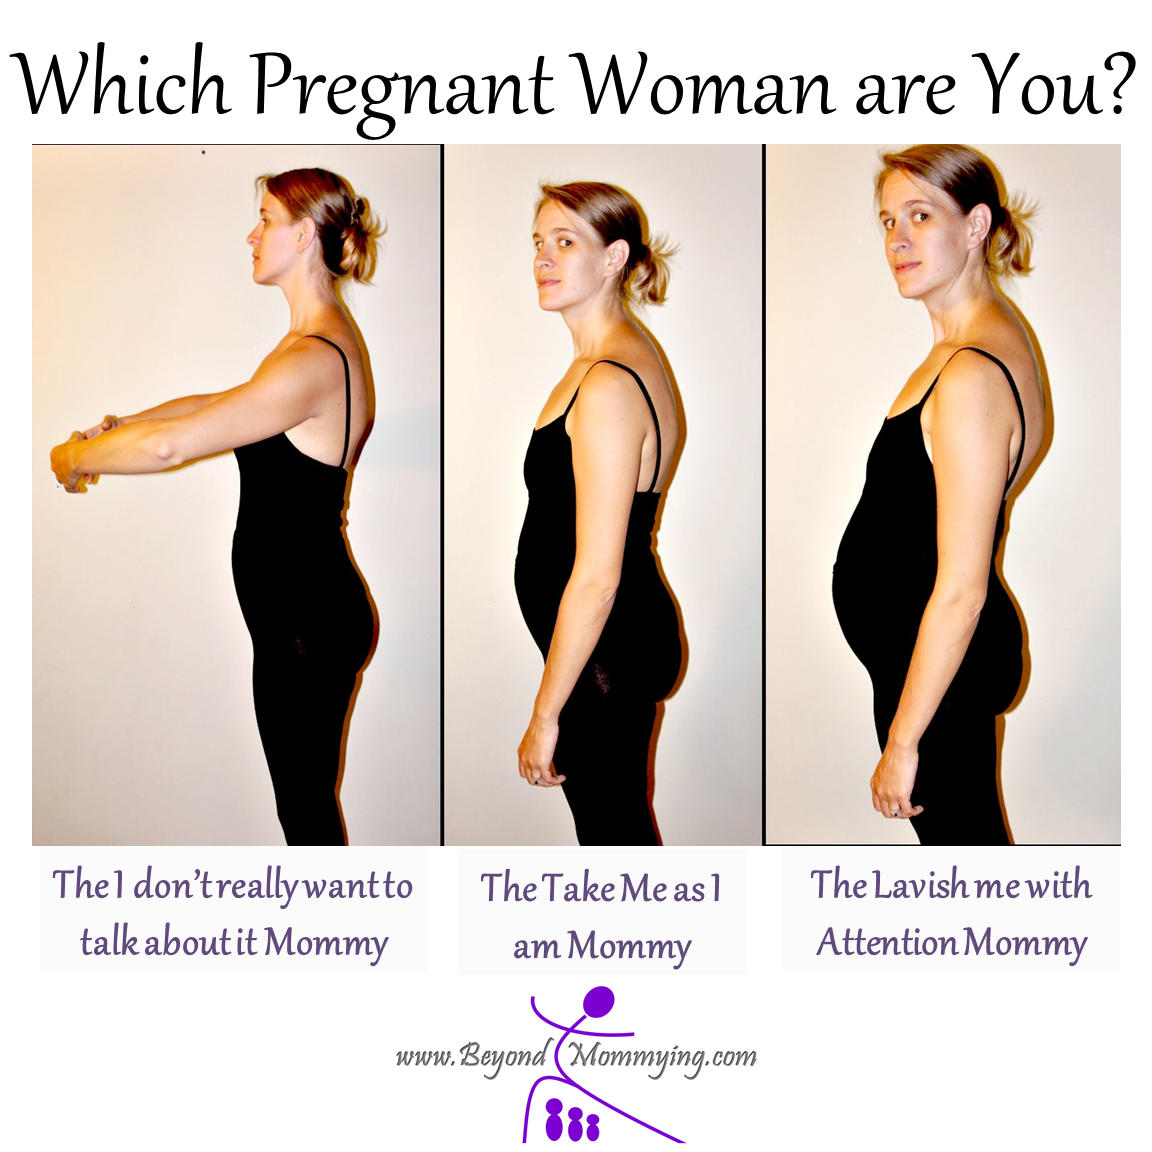 https://www.beyondmommying.com/blog/wp-content/uploads/2015/04/baby-bumps-insta.png